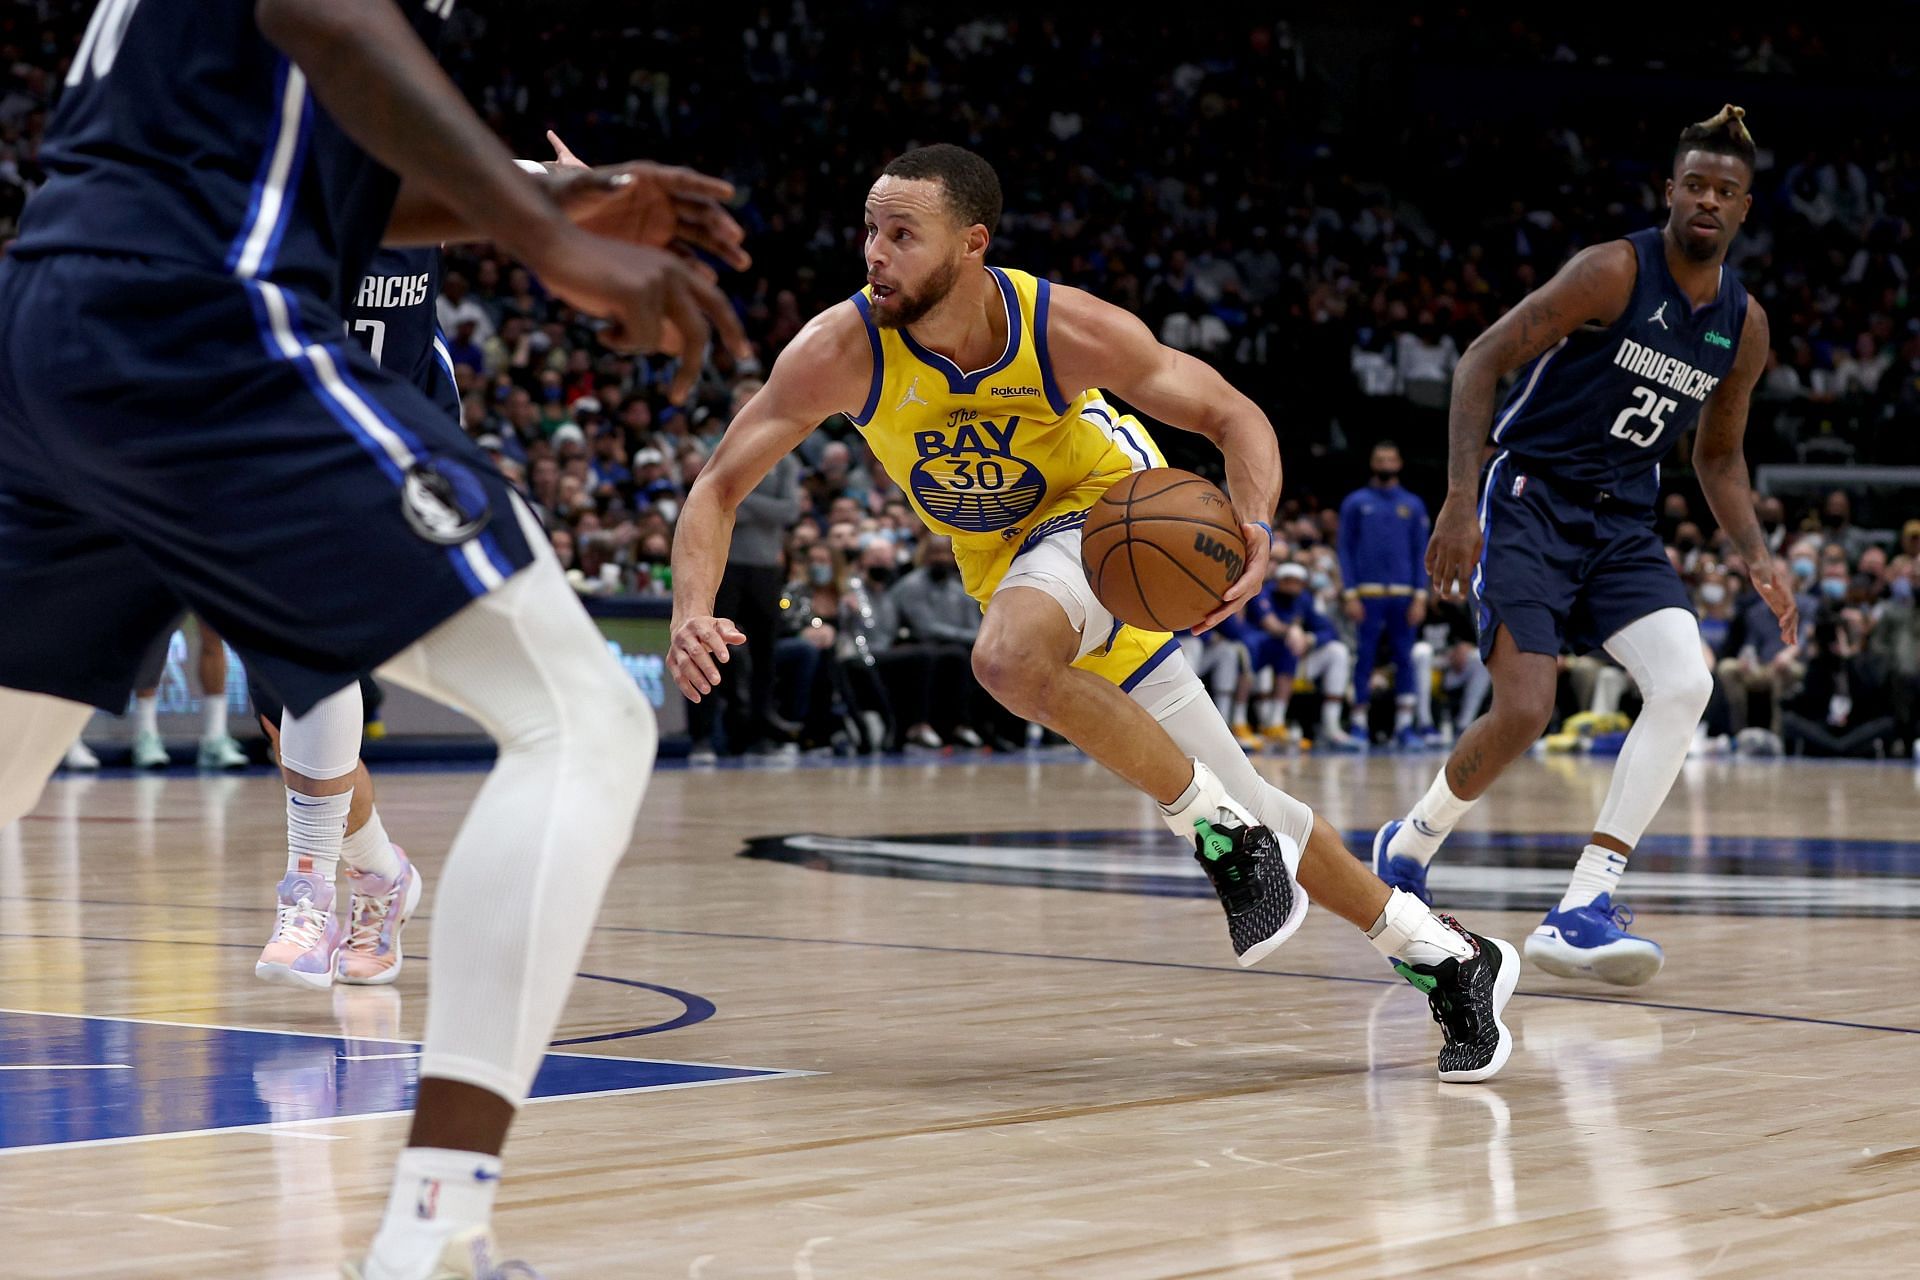 Steph Curry #30 of the Golden State Warriors drives to the basket against Reggie Bullock #25 of the Dallas Mavericks in the third quarter at American Airlines Center on January 05, 2022 in Dallas, Texas.